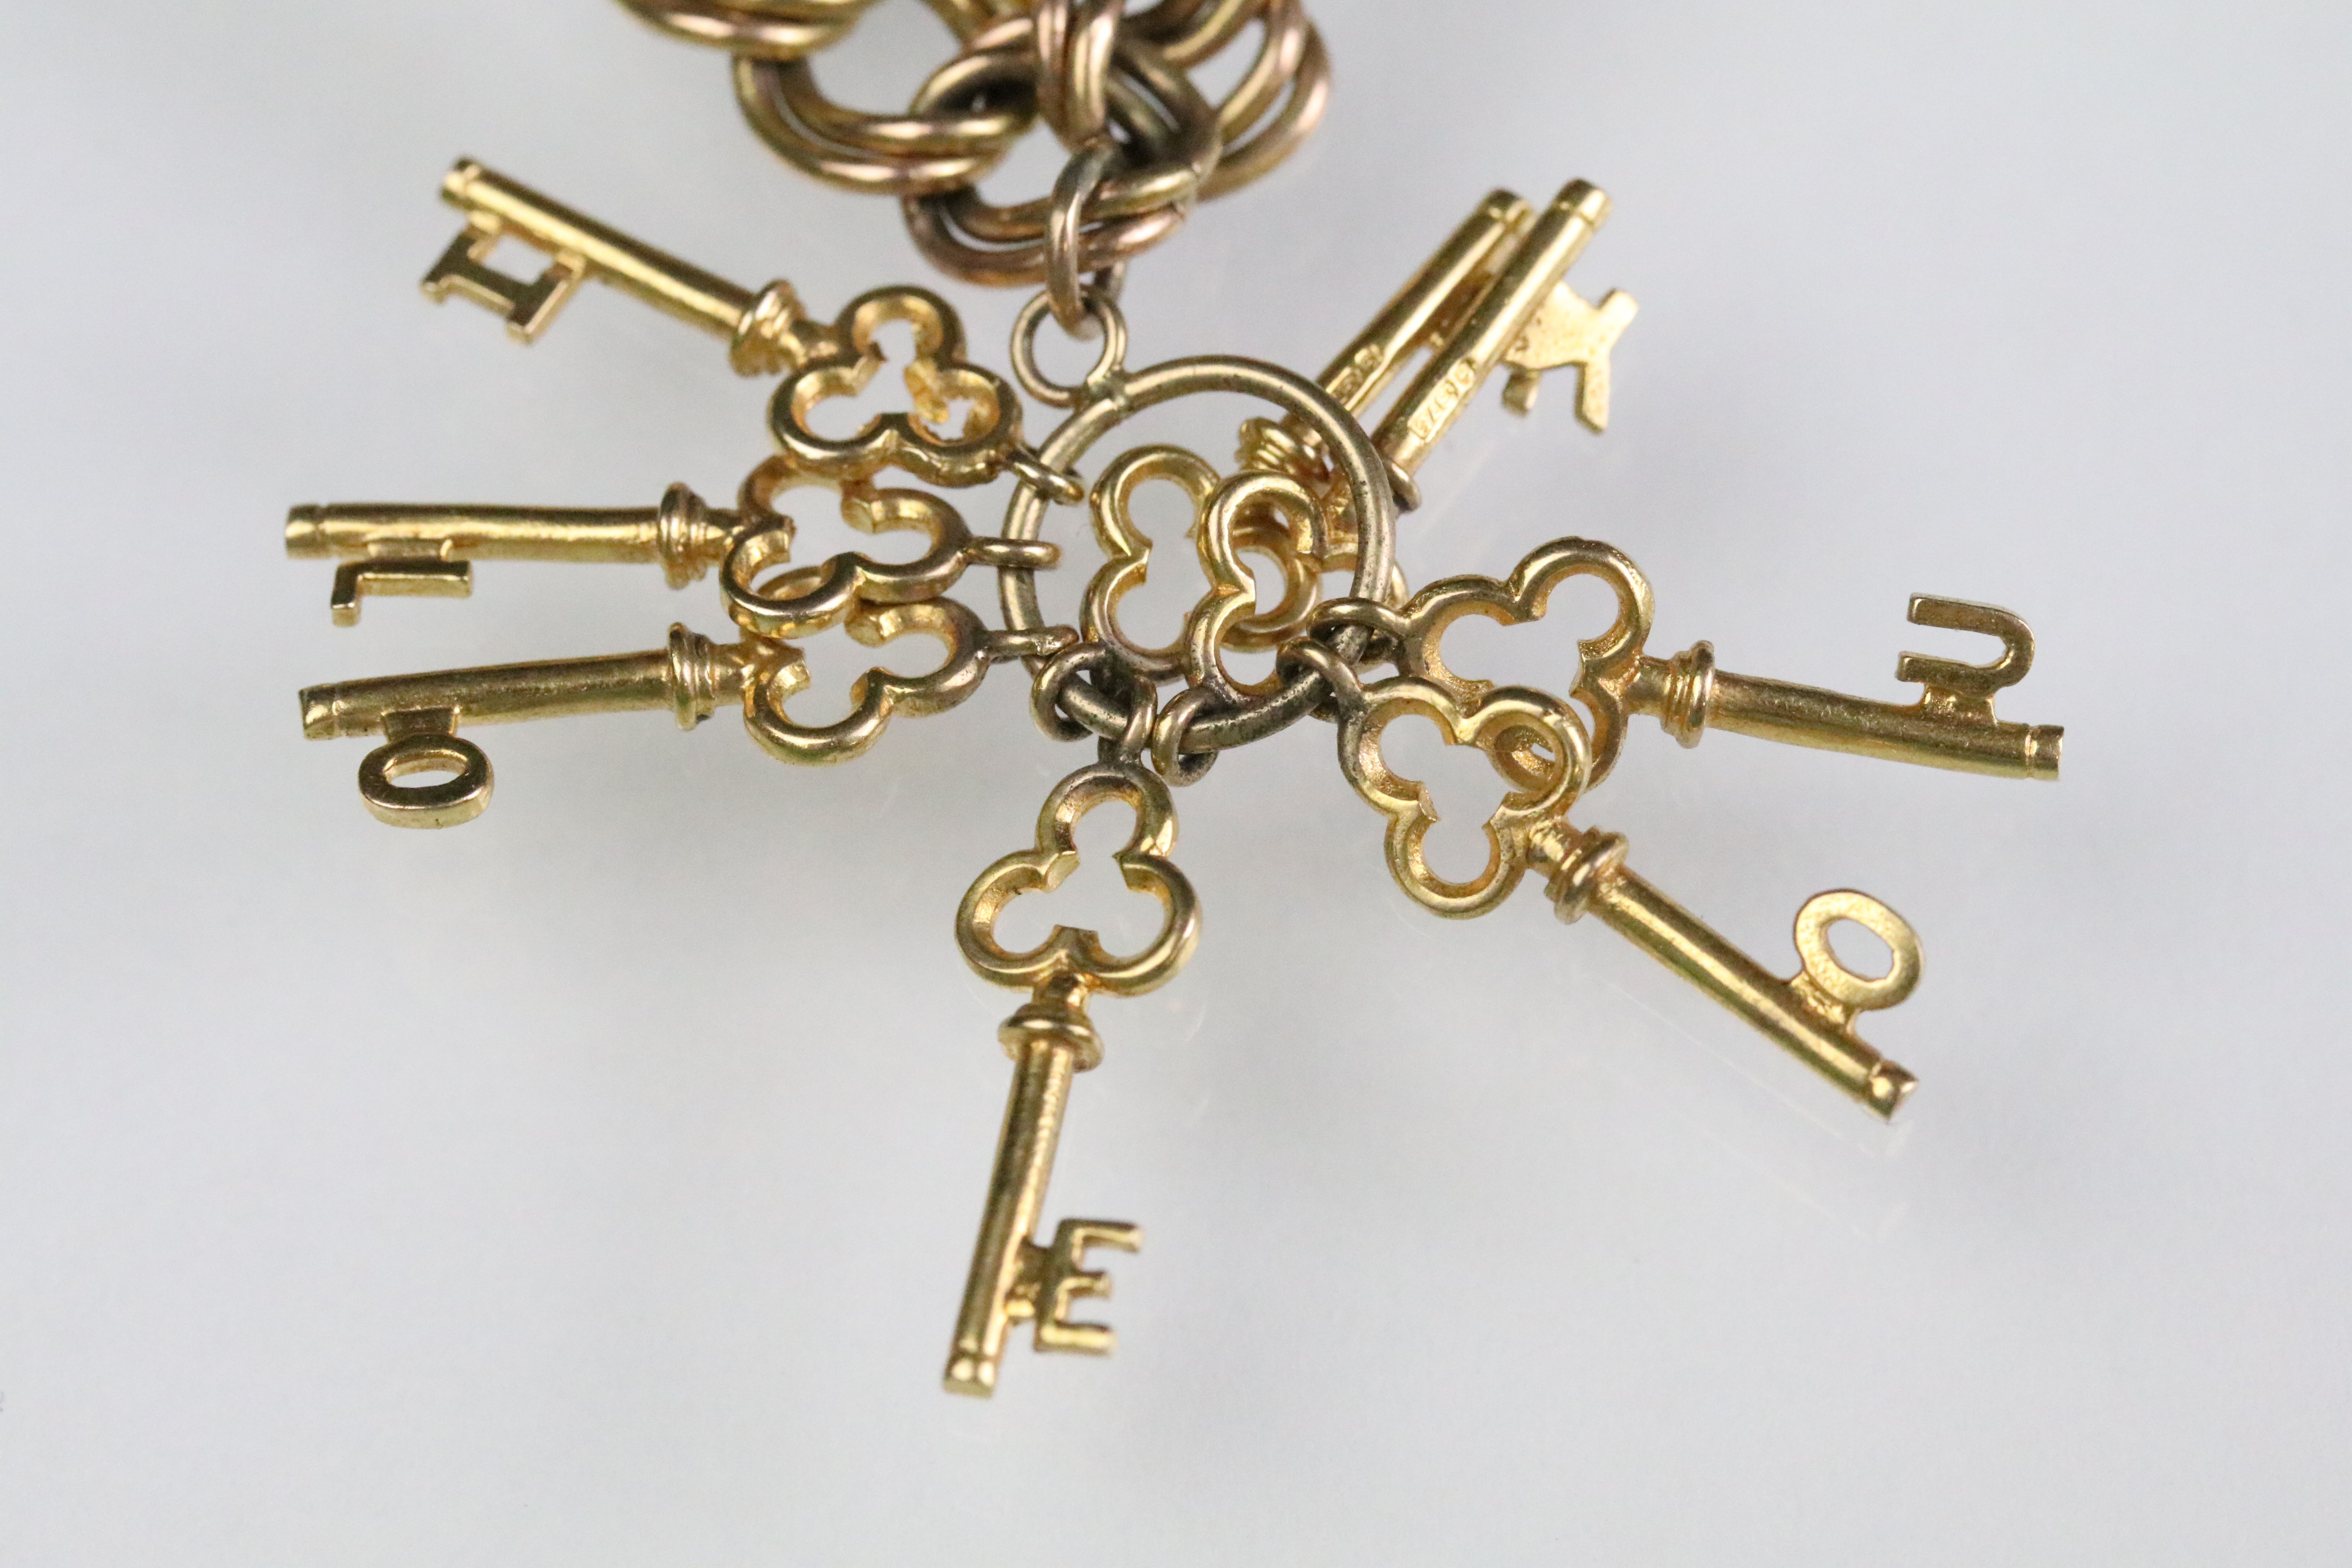 9ct gold hallmarked charm bracelet. The double curb heart lock bracelet mounted with five 9ct gold - Image 10 of 13